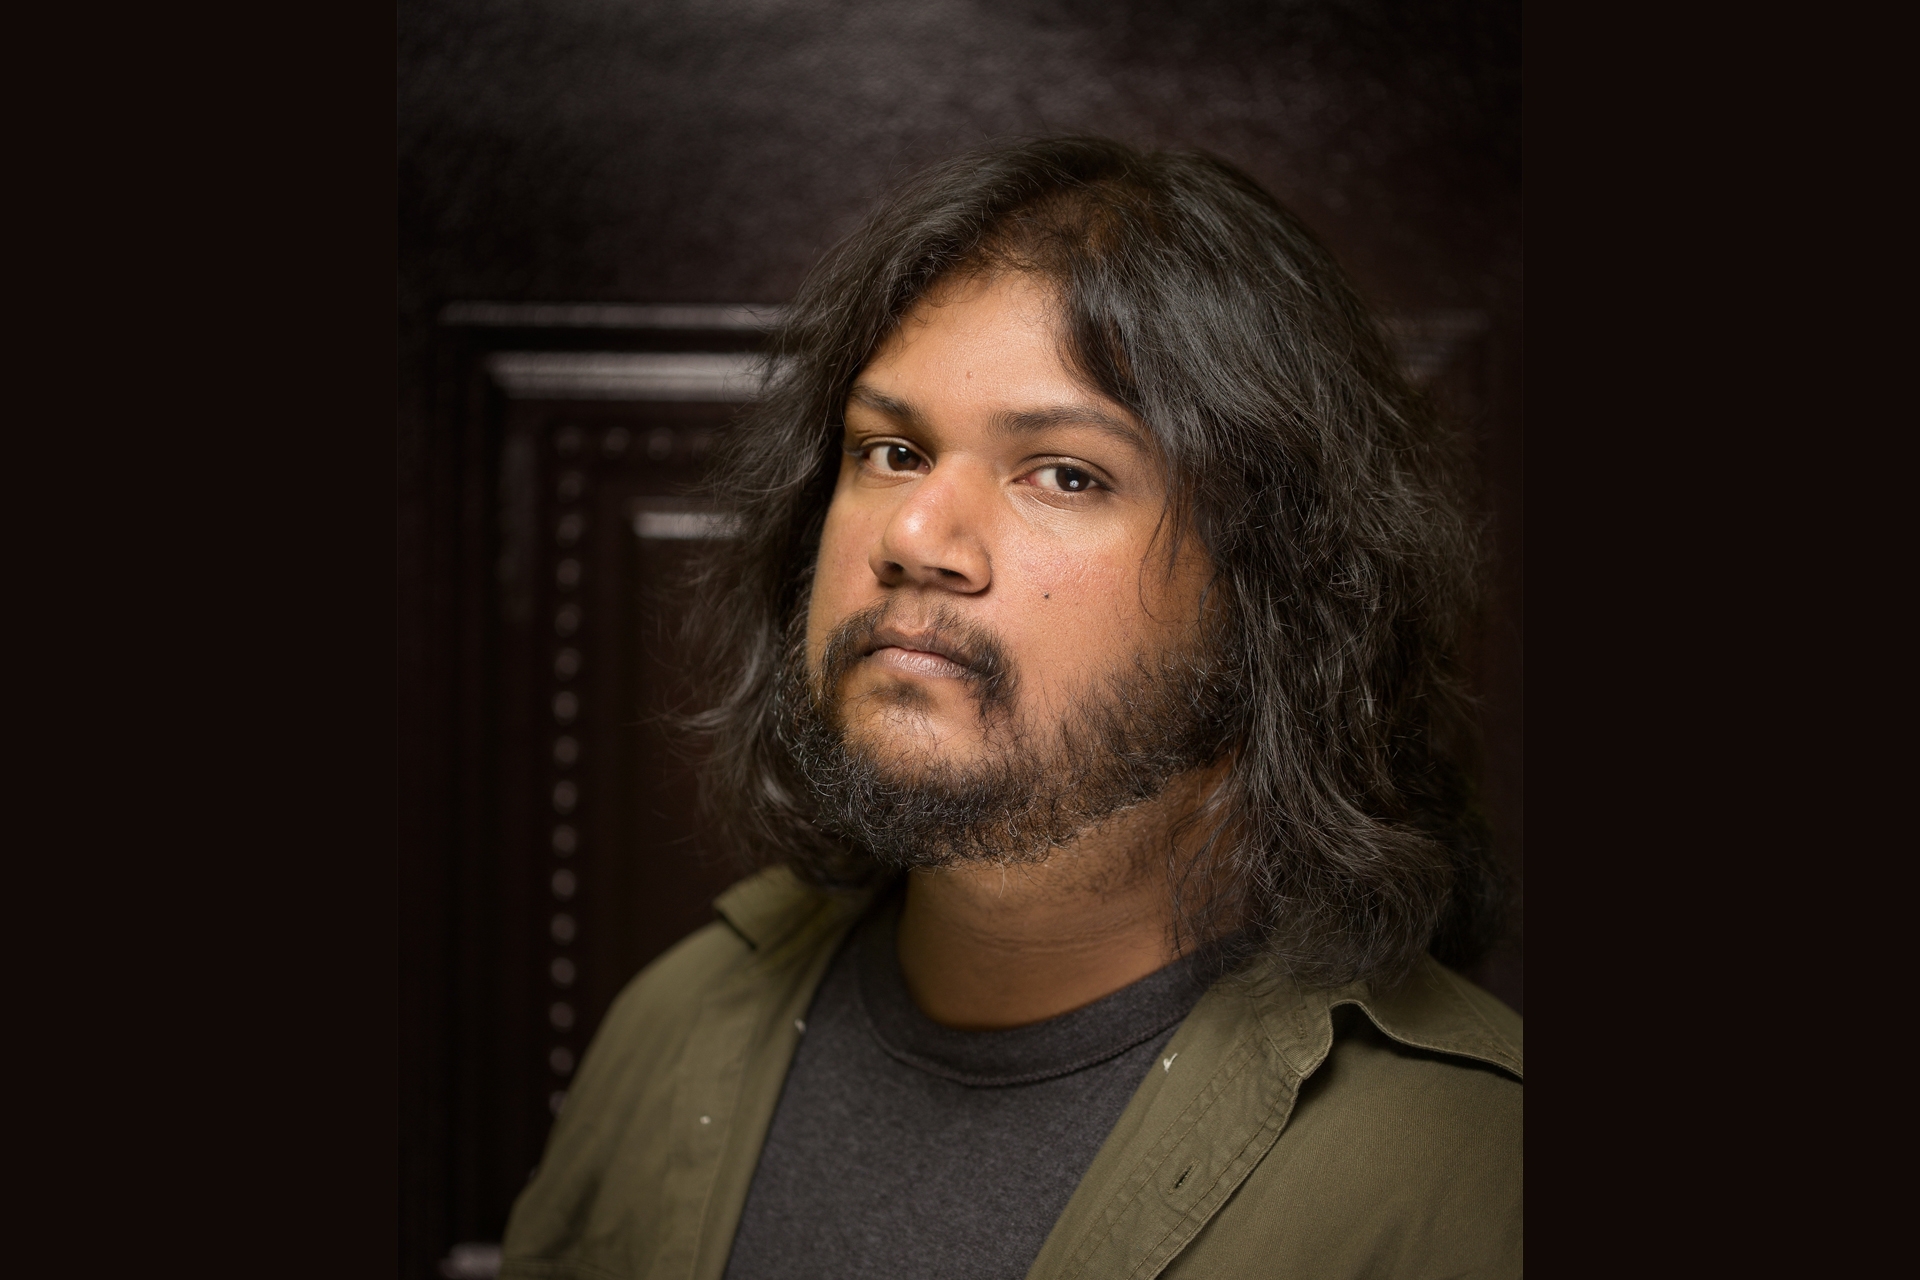 C&TH Book Club: Interview with Author Kevin Jared Hosein